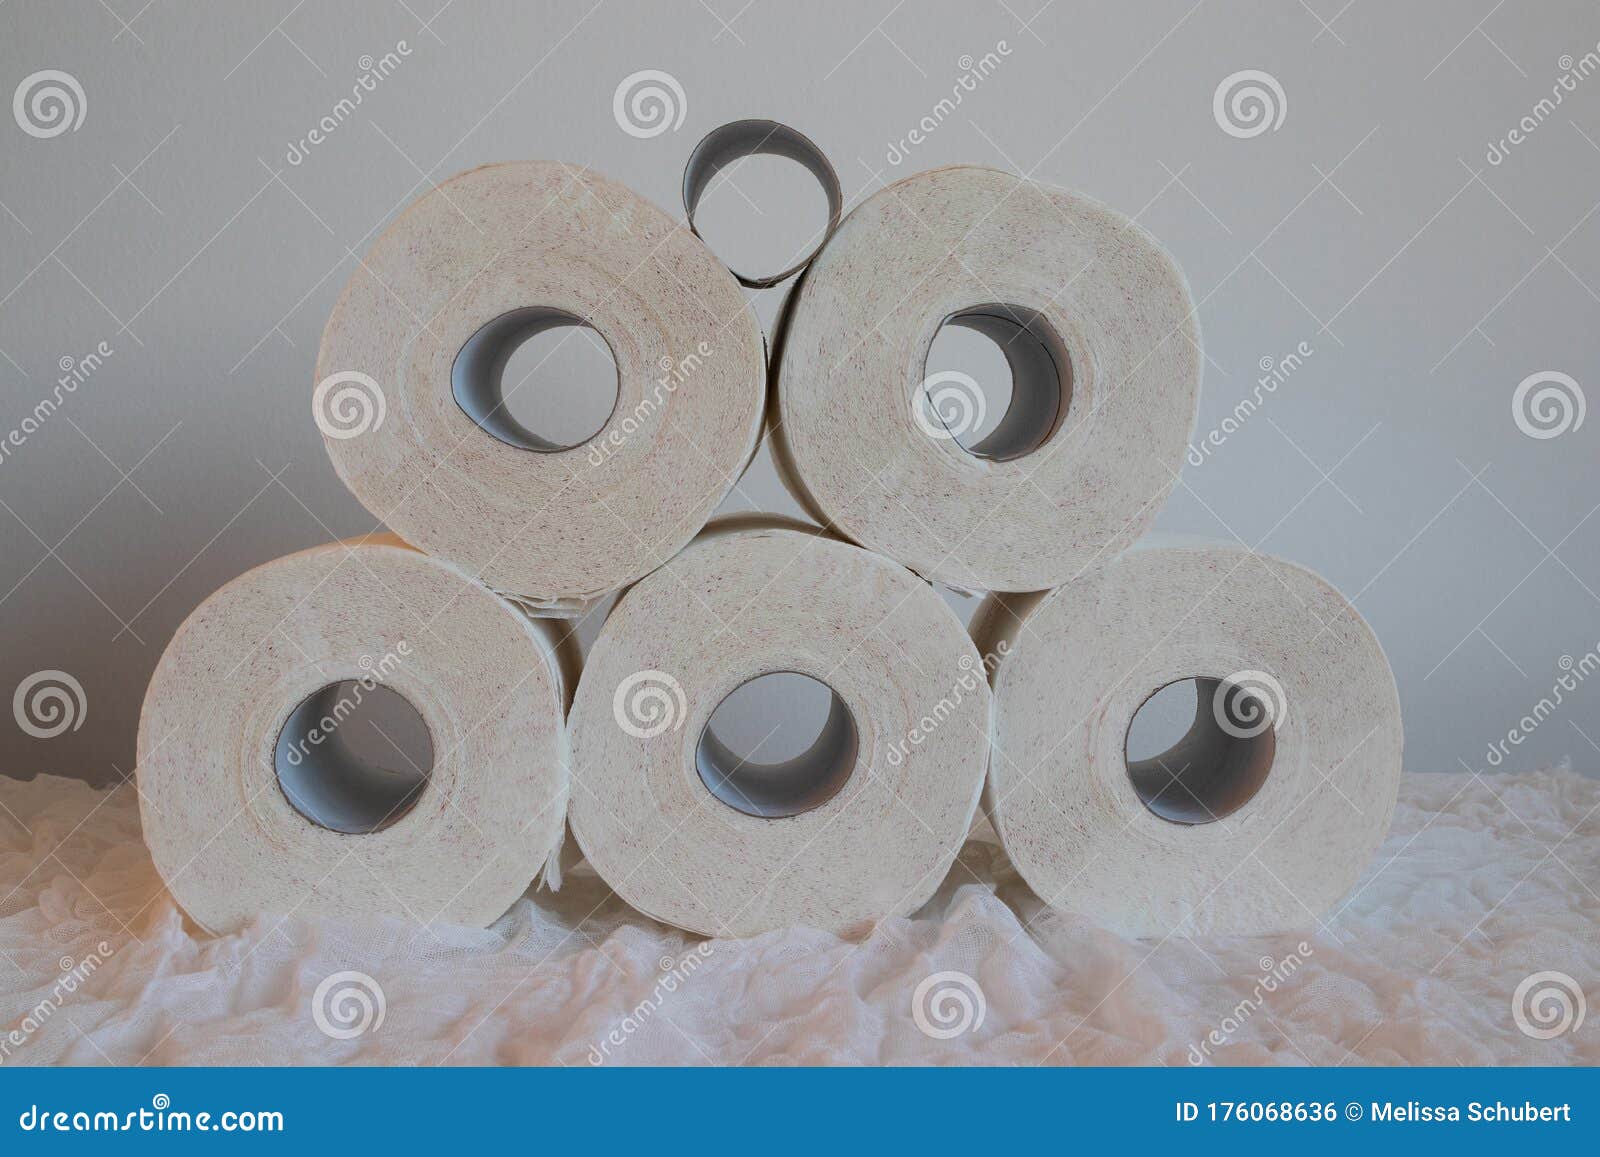 Five Full Rolls and One Empty Cardboard Toilet Paper Tube Stacked in ...